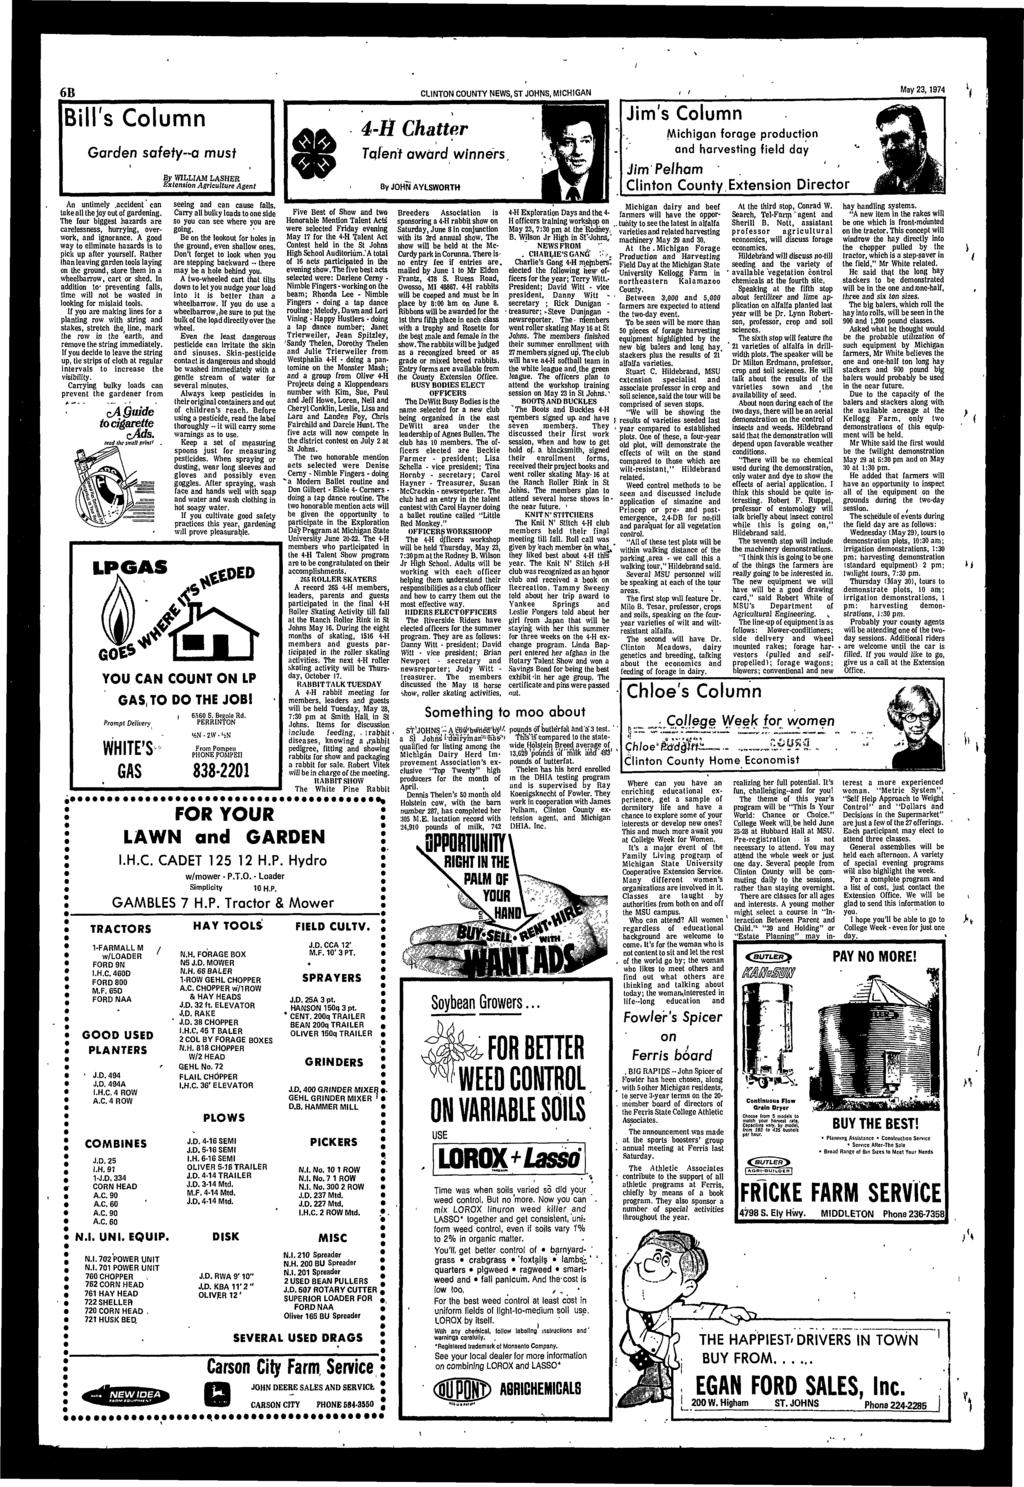 I 6B CLINTON COUNTY NEWS, ST JOHNS, MICHIGAN / / May 23,1974 Bll's Column Garden safefy-a must An untmely.accdent'can take all the joy out of gardenng.